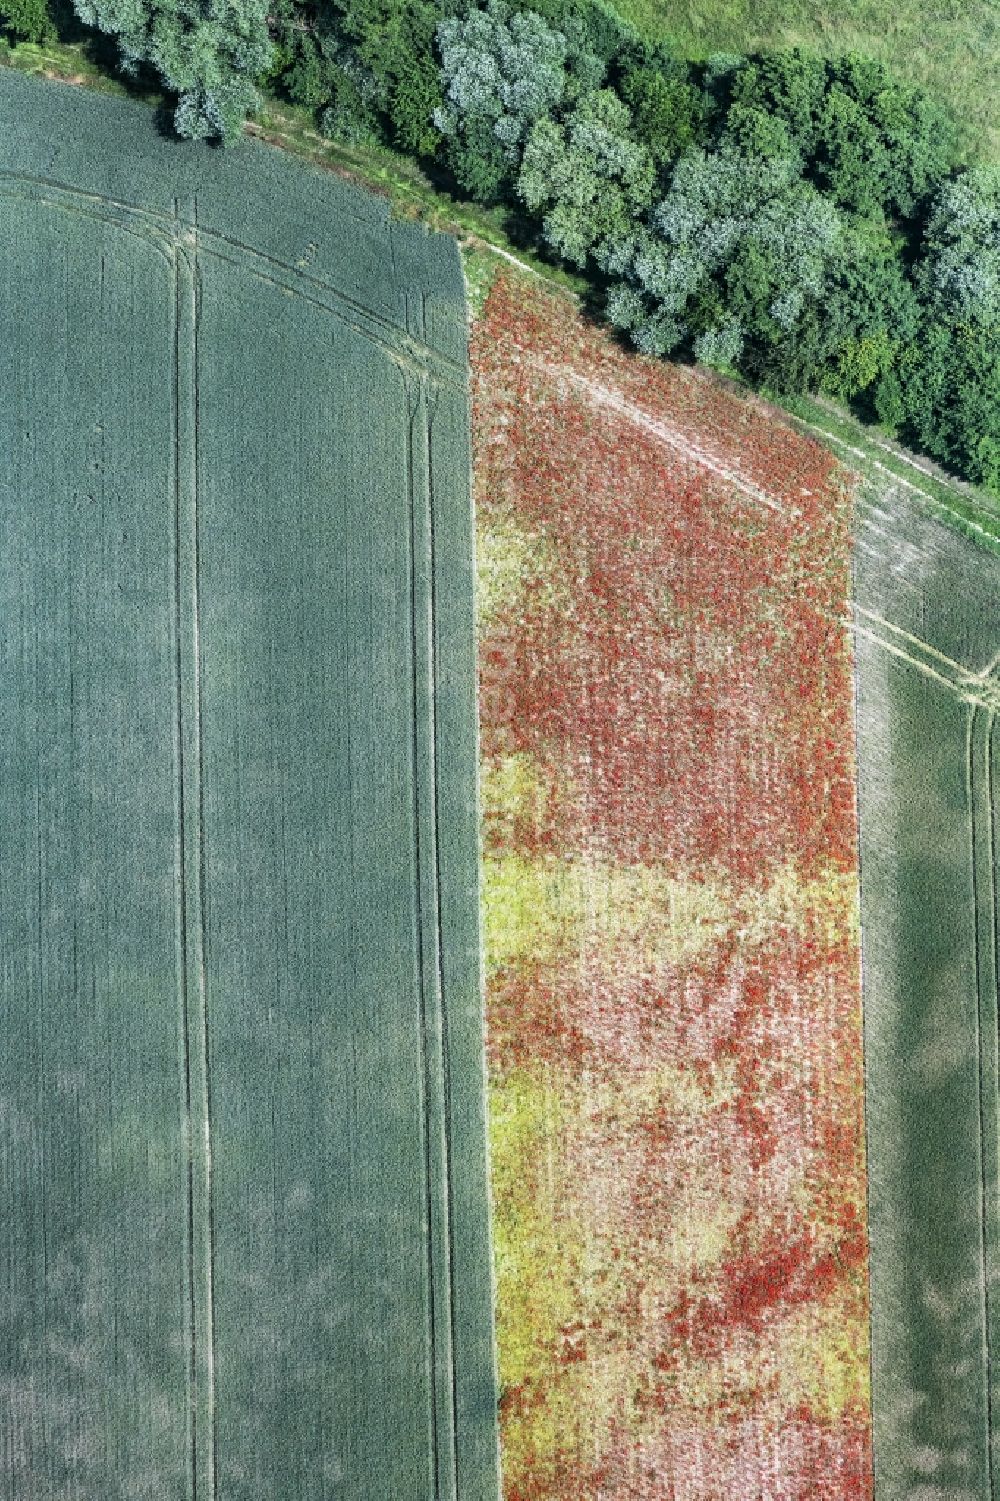 Vertical aerial photograph Erlenbach bei Kandel - Vertical aerial view from the satellite perspective of the field landscape of red blooming poppy flowers in Erlenbach bei Kandel in the state Rhineland-Palatinate, Germany